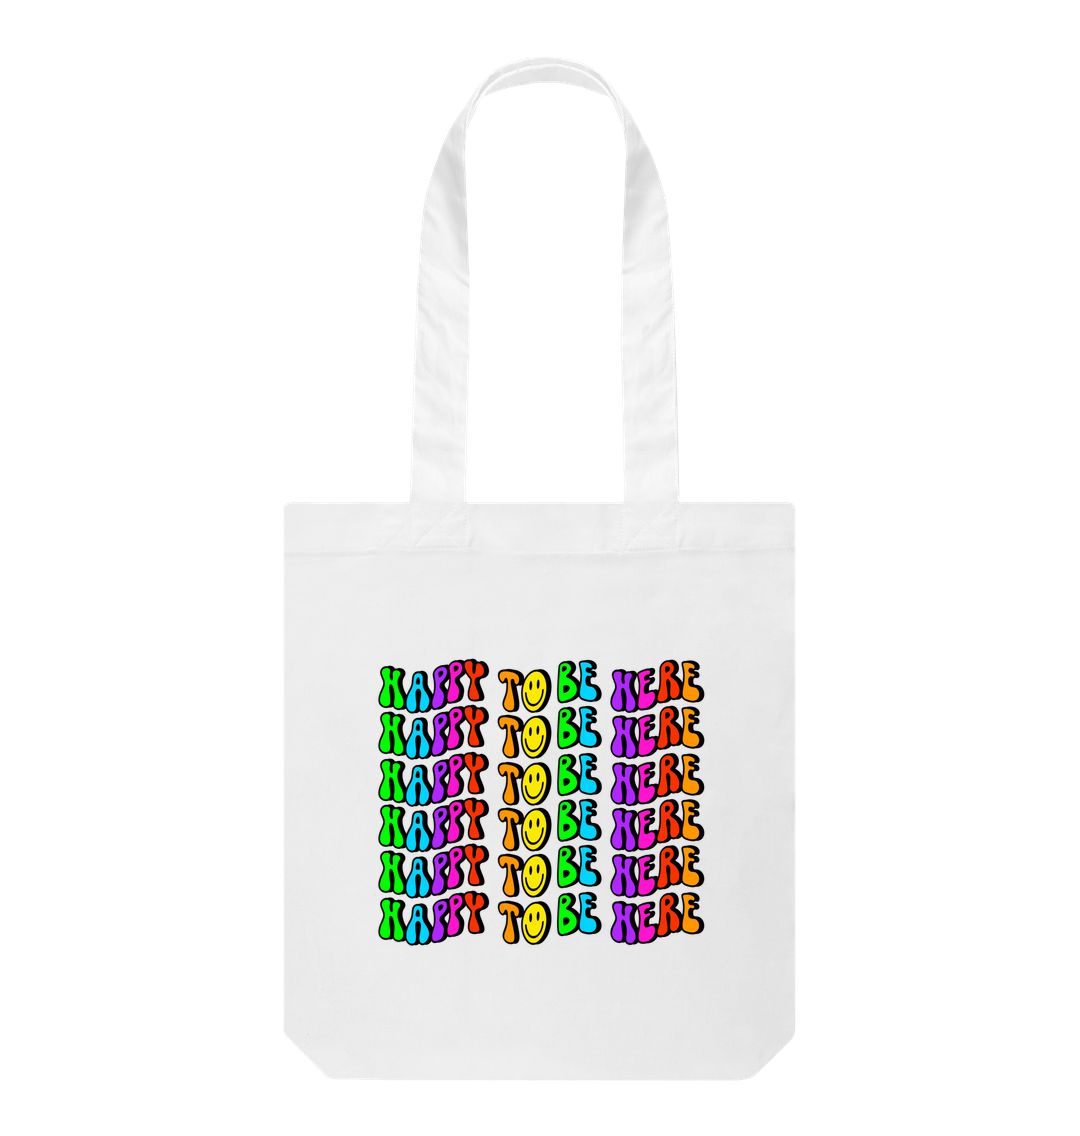 White Happy to be here tote